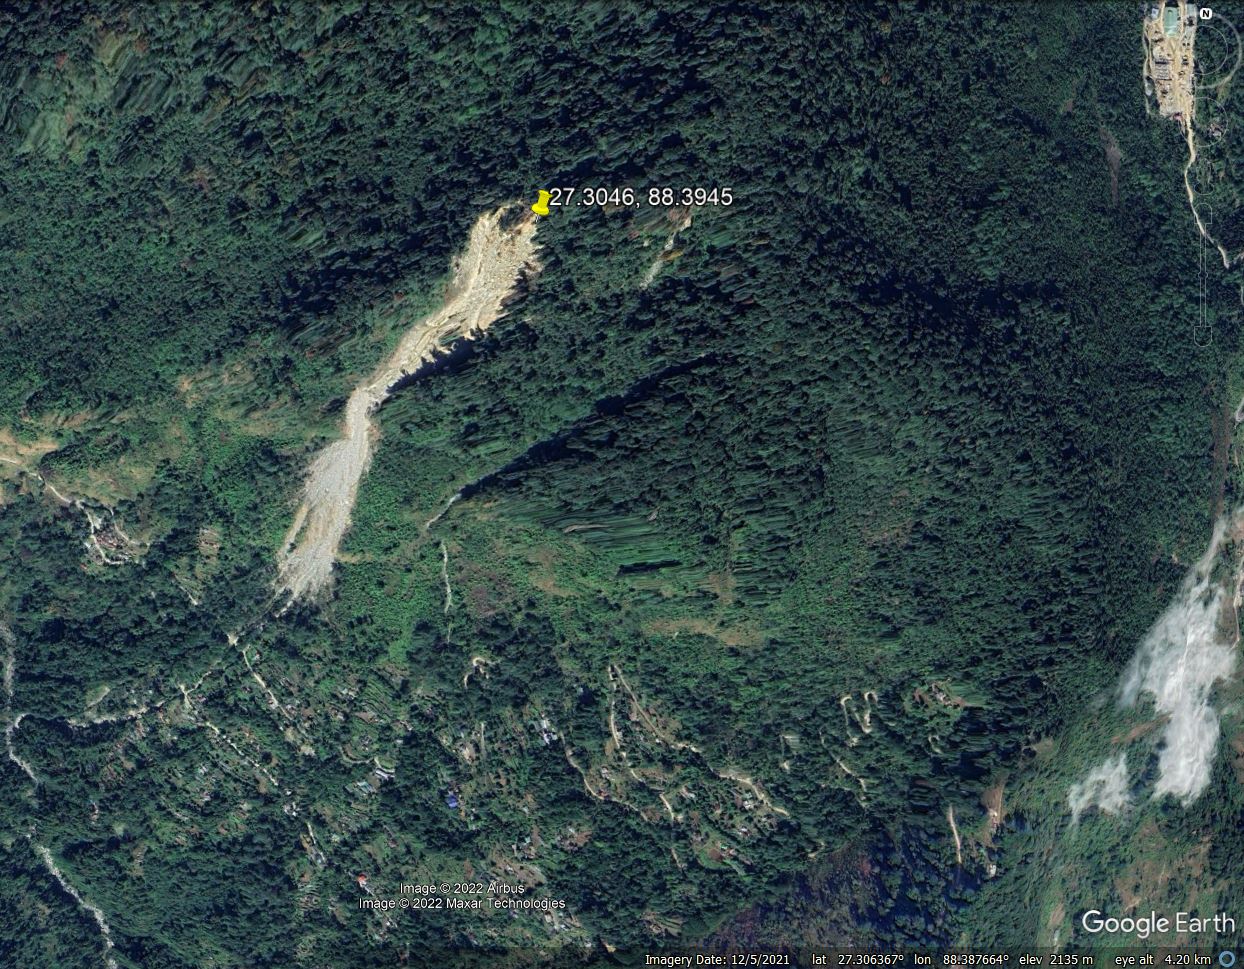 Google Earth image of the Gaguney landslide in India, collected in 2021.